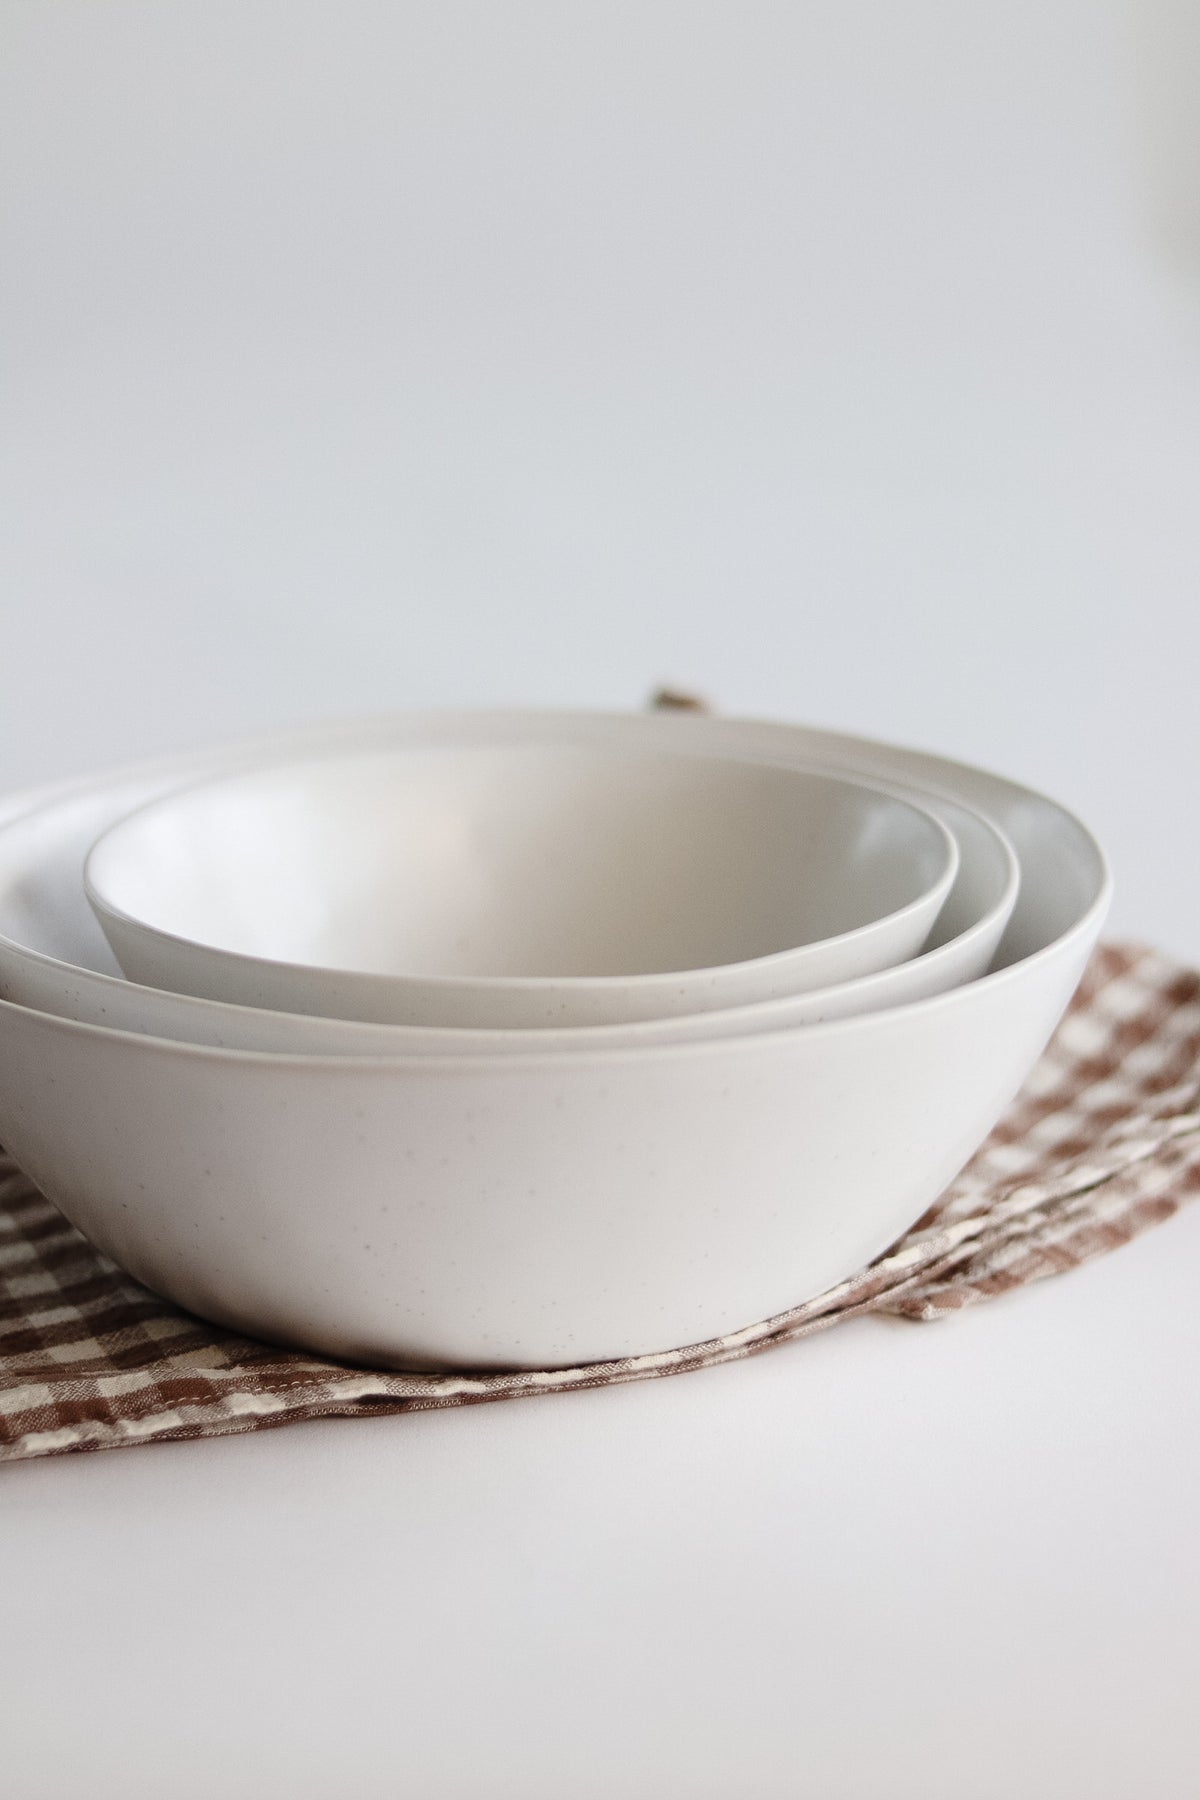 The Nested Serving Bowls